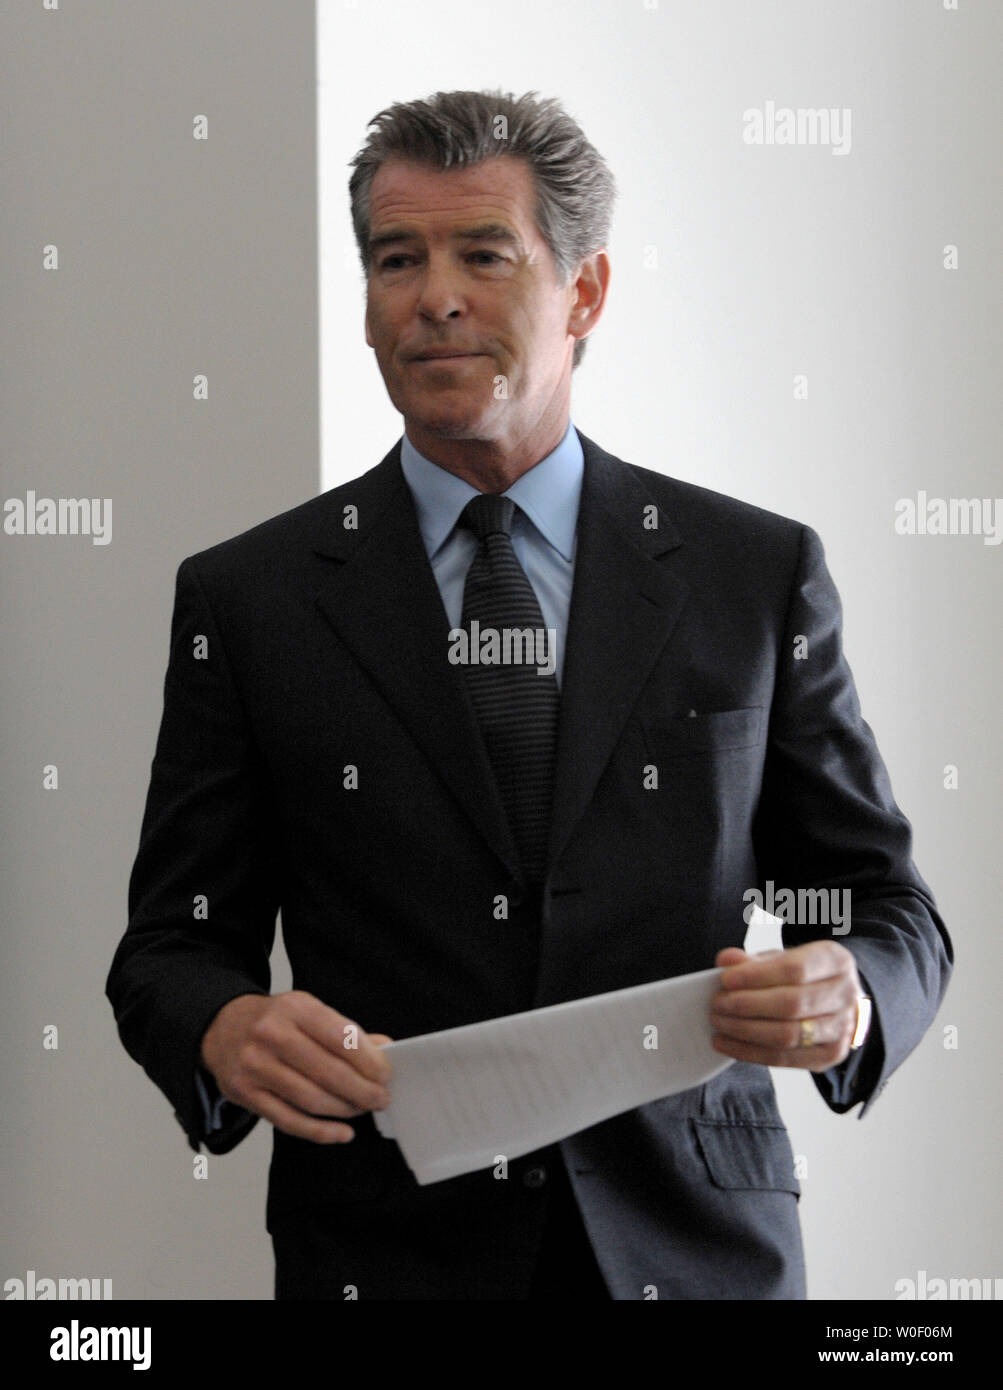 Actor Pierce Brosnan testifies in an Environmental Protection Agency (EPA) public hearing on carbon dioxide and other global warming pollutions that present a danger to public health and welfare in Arlington, Virginia, on May 18, 2009.    (UPI Photo/Roger L. Wollenberg) Stock Photo